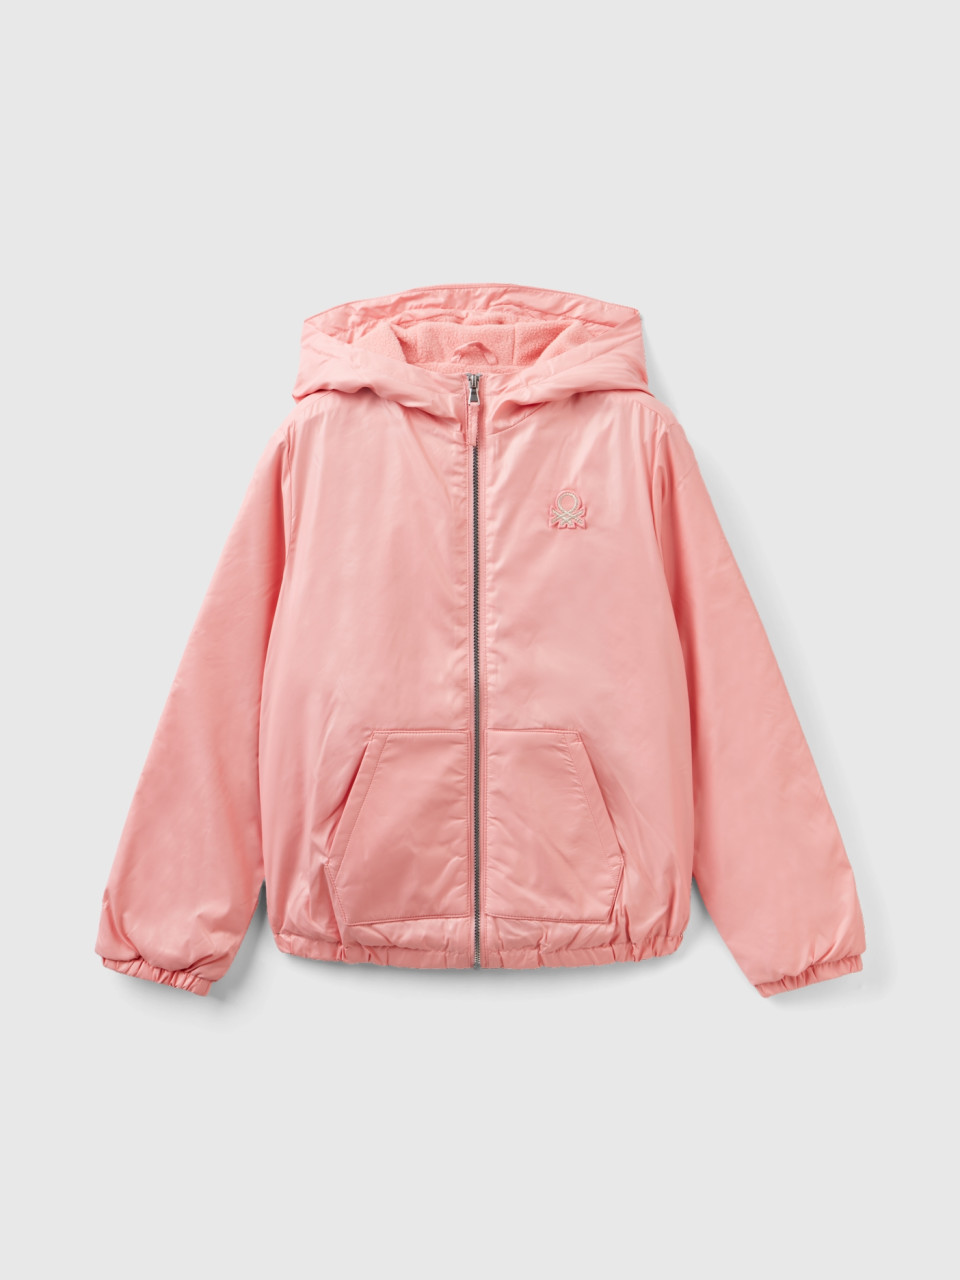 Benetton, Glossy Jacket With Zip And Hood, Pink, Kids